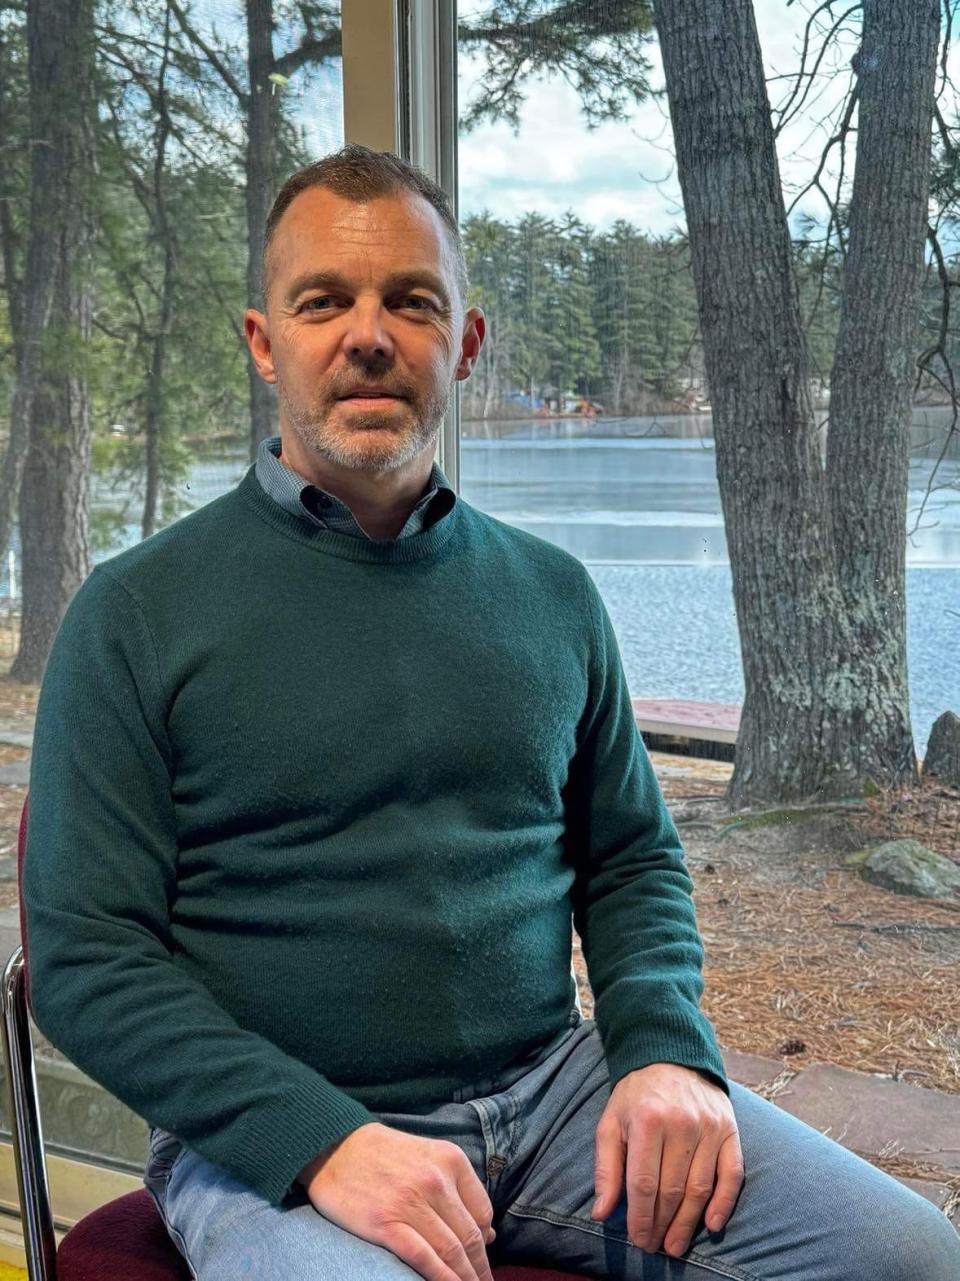 Brian Dumont, seen here at his home at Sand Pond in Sanford, Maine, is the president of the newly formed Sanford Pond Association, LLC, which is engaged in efforts to prevent a local landowner from building a new campground at the pond.